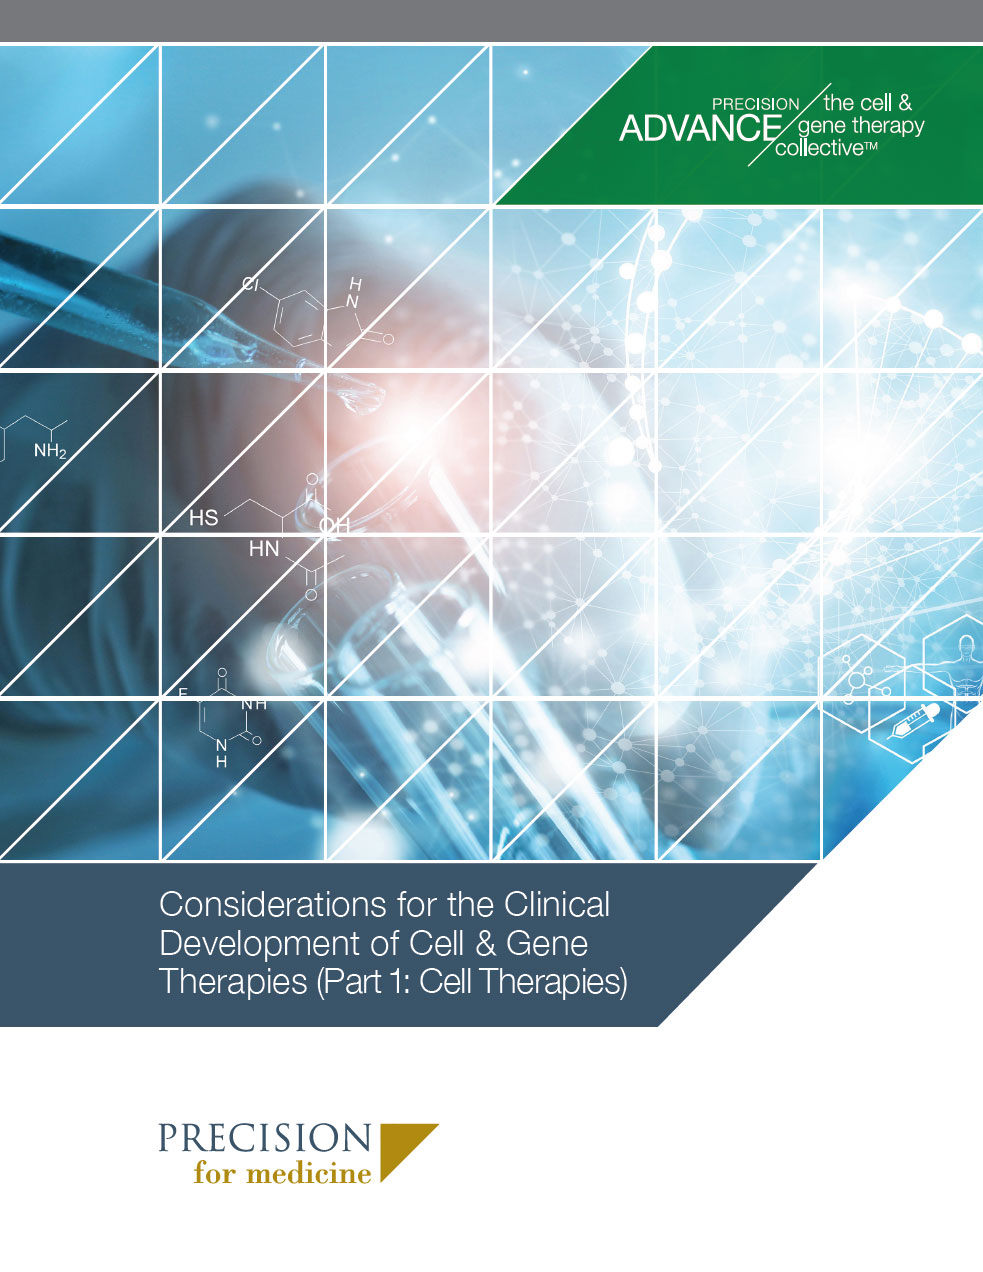 Considerations for the Clinical Development of Cell & Gene Therapies (Part 1: Cell Therapies)